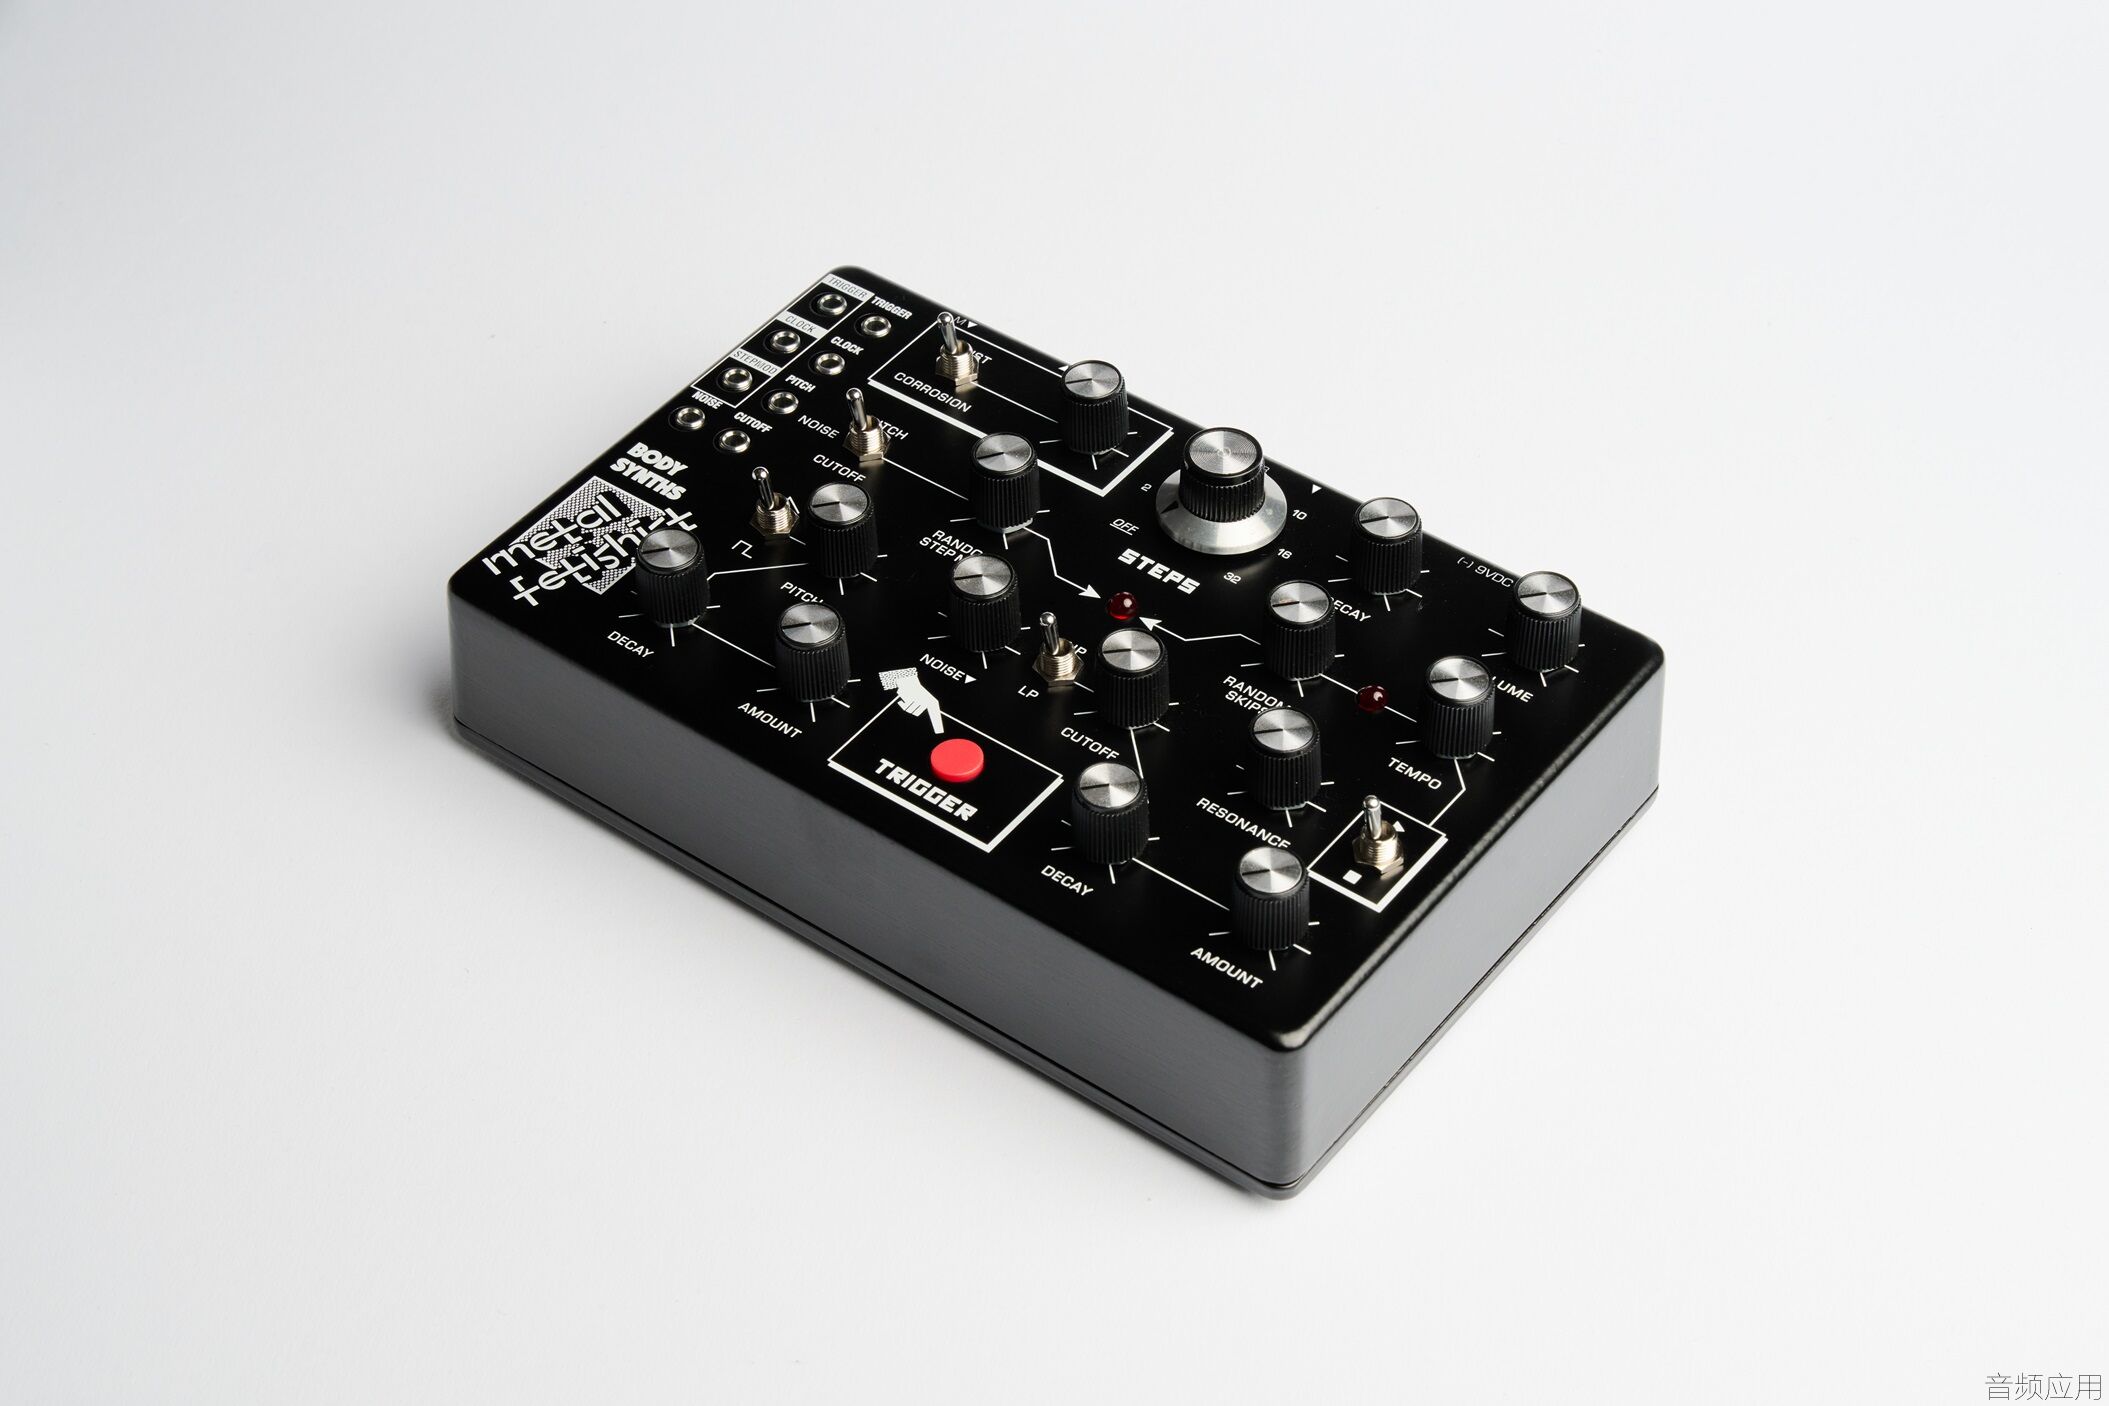 1113924d1715340574-body-synths-announces-metal-fetishist-synthesizer-body-synths.jpg